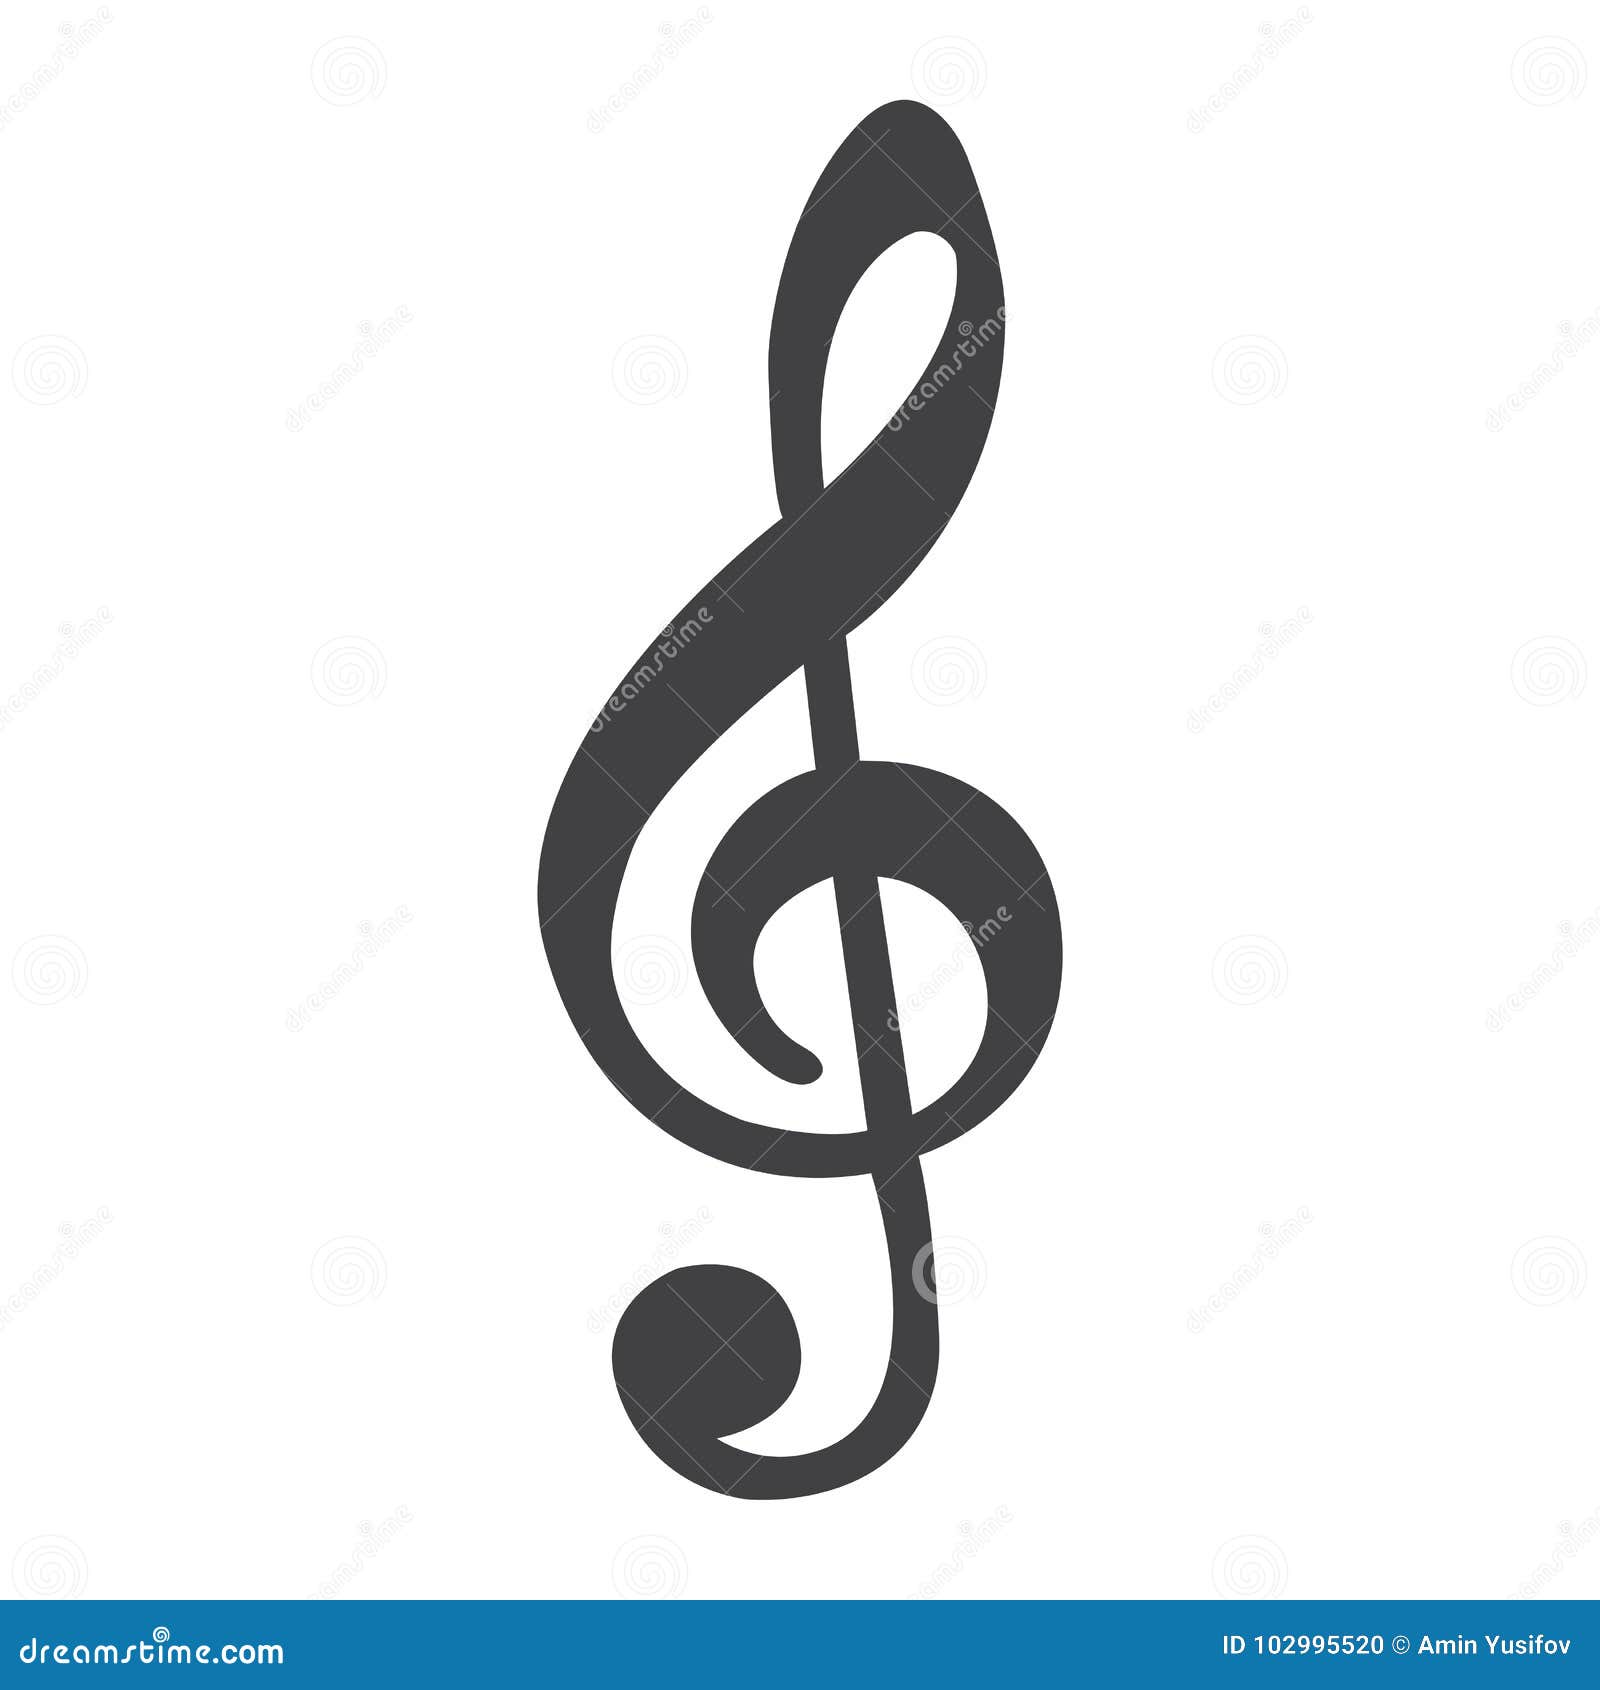 treble clef line icon, music and instrument,